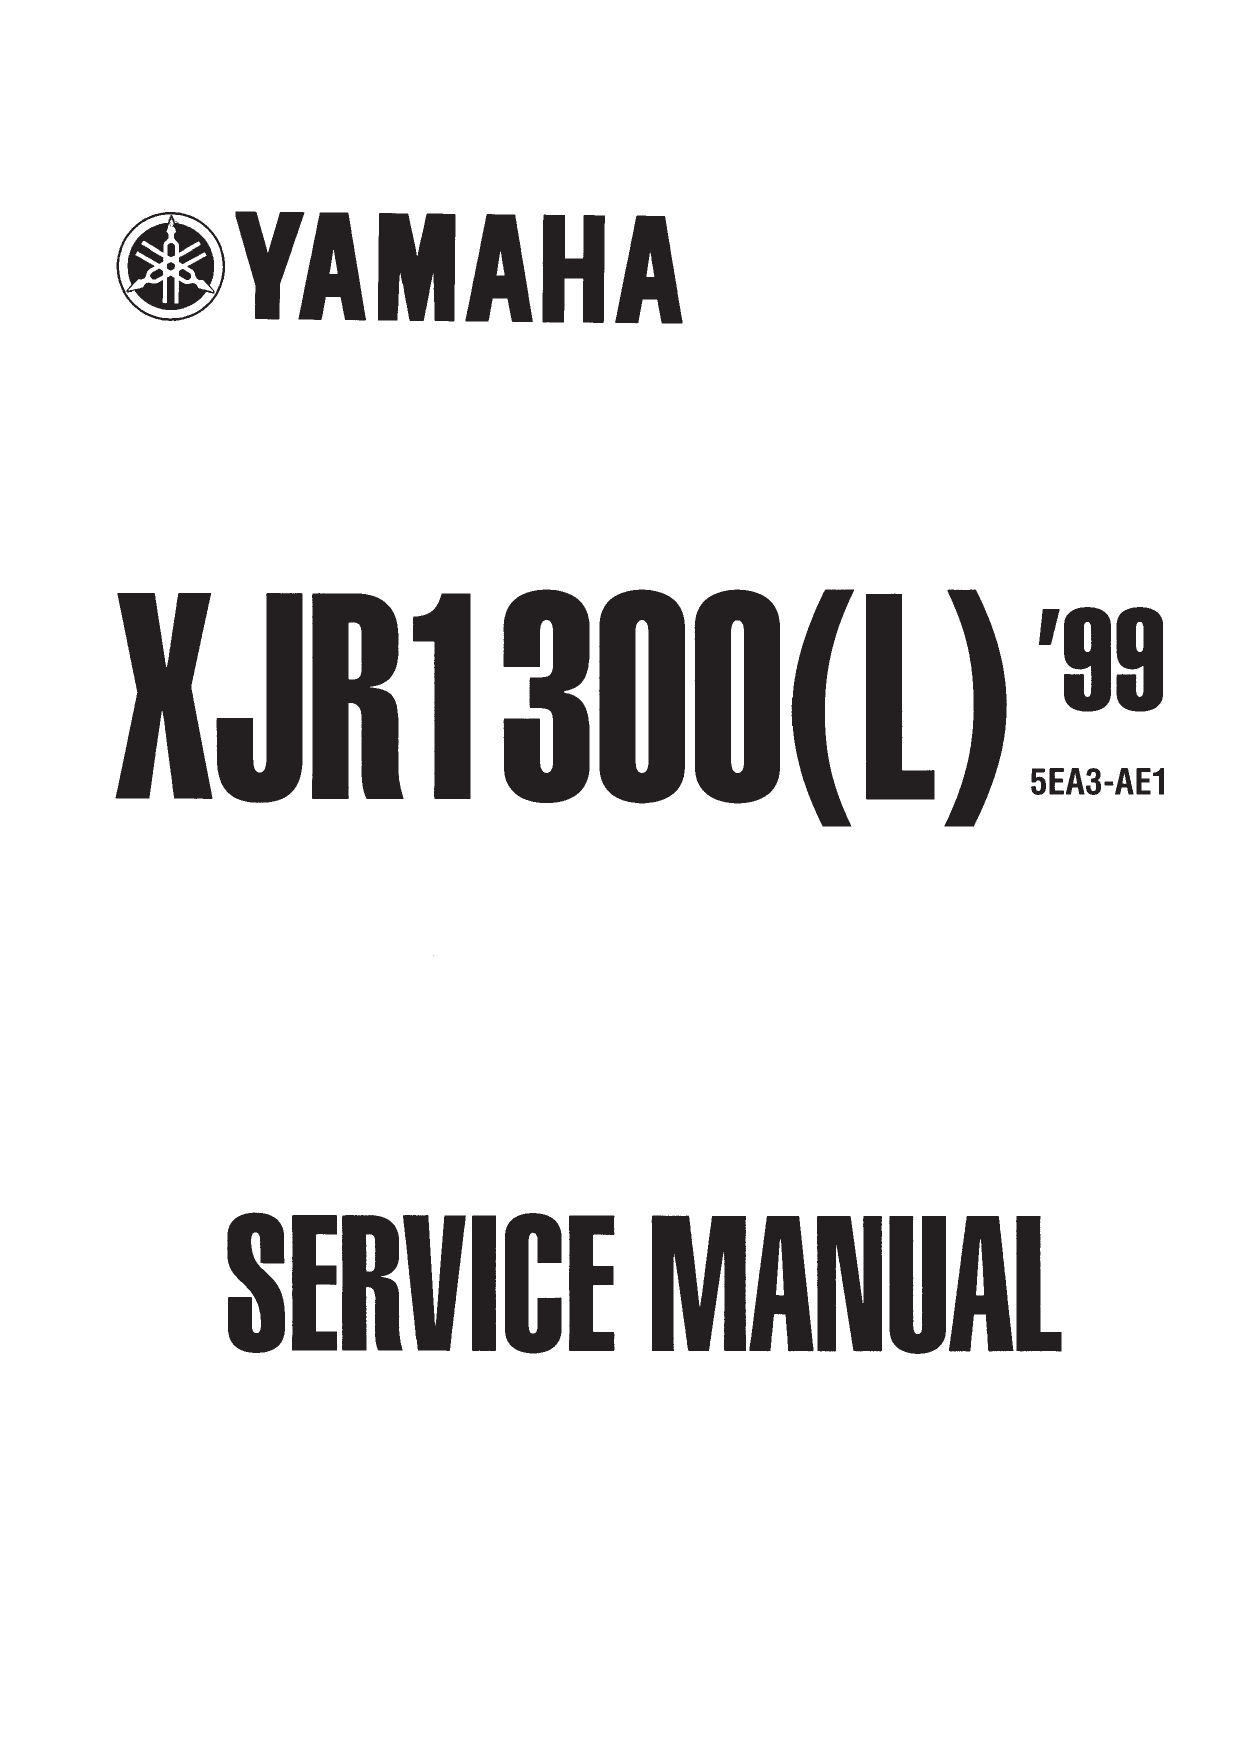 1995-2006 Yamaha XJR 1300(L) service manual Preview image 6